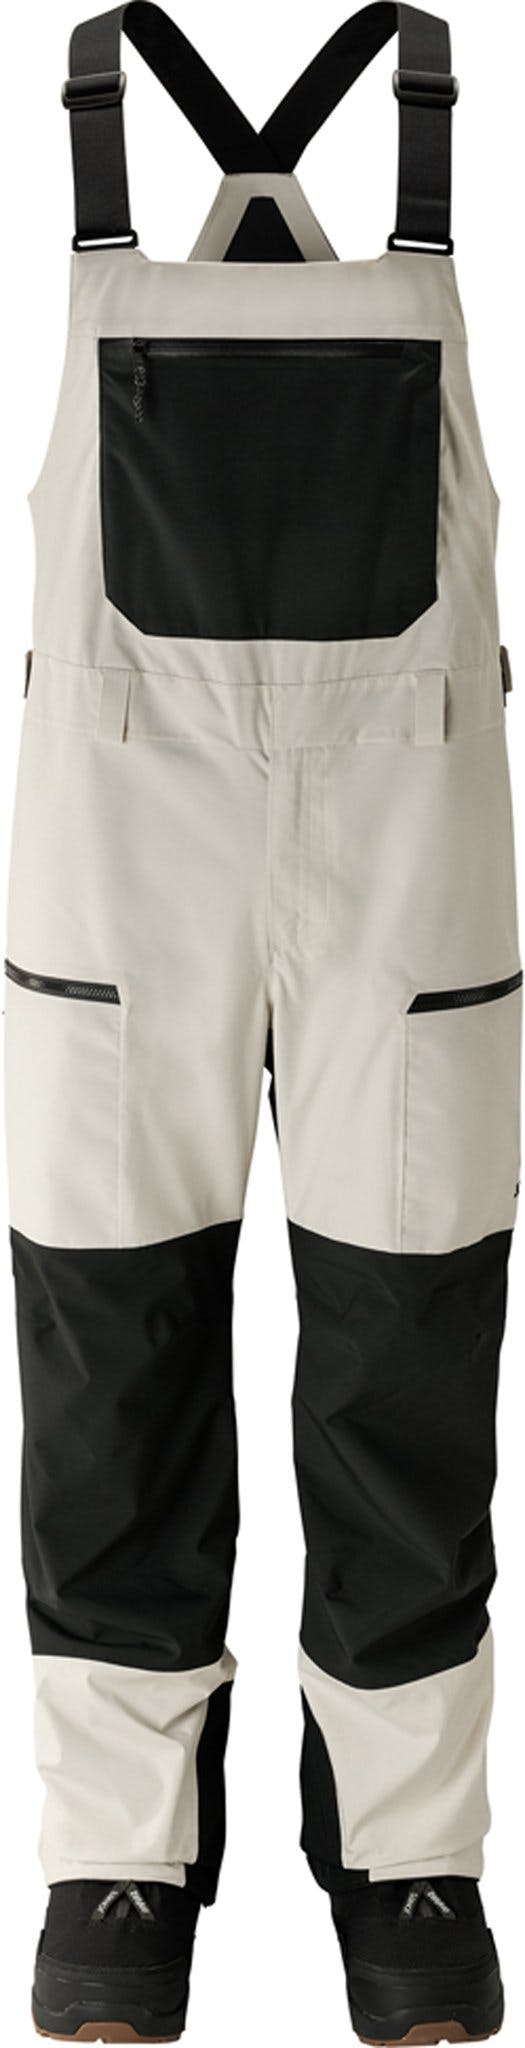 Product image for MTN Surf Recycled Bib Pant - Men's